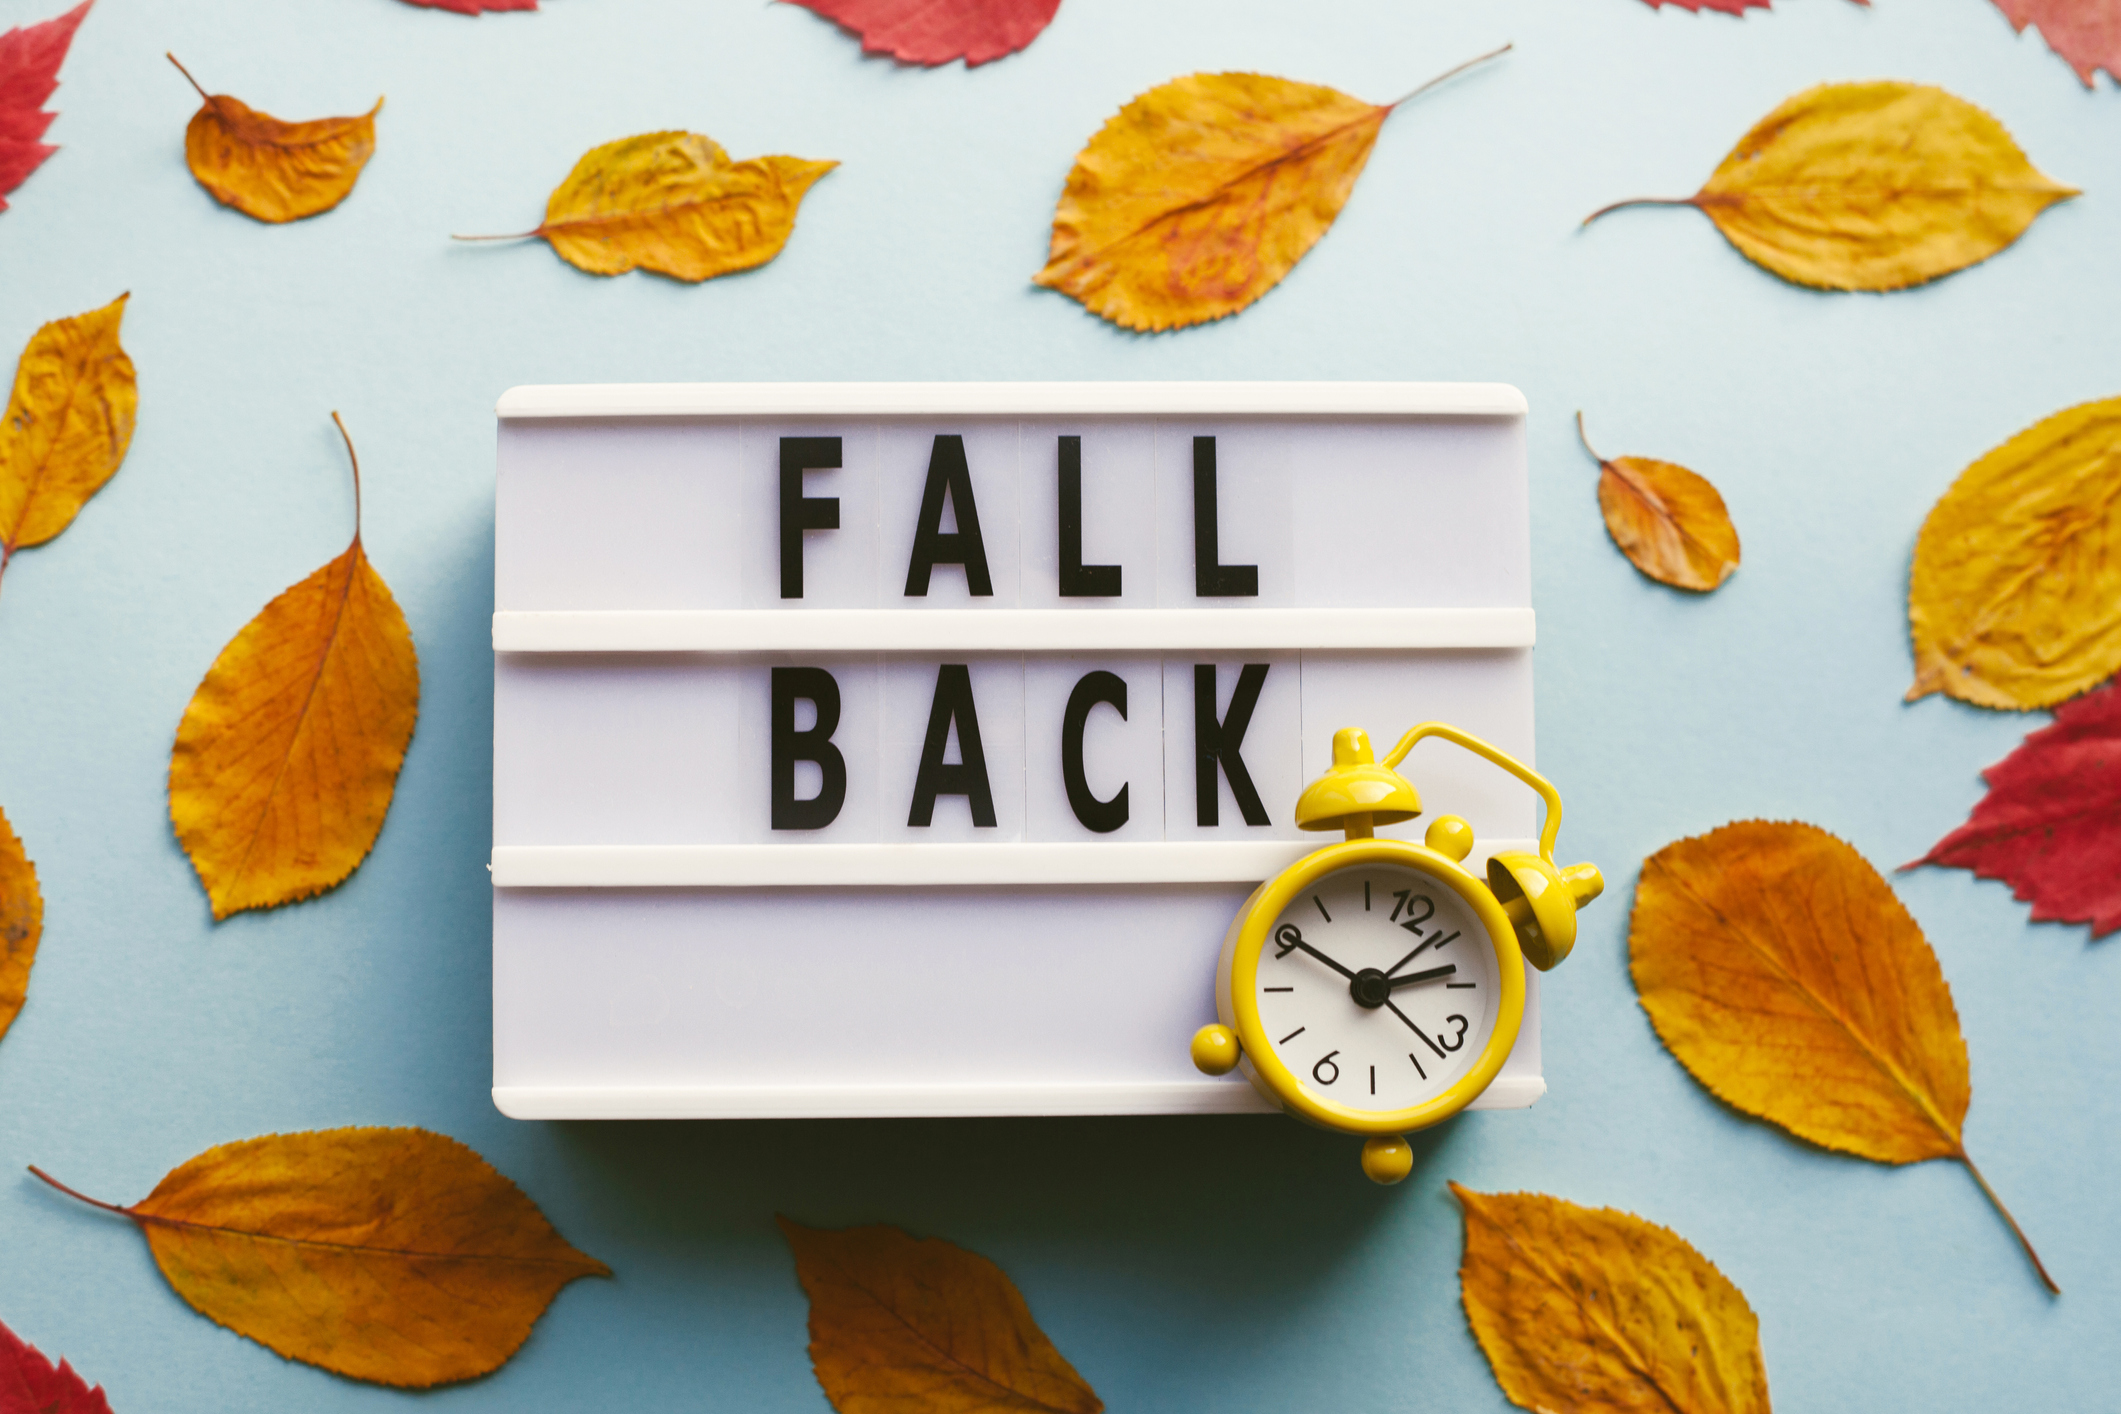 Summer Time ends this Sunday(Nov. 4th)  Daylight savings time, Daylight  saving time ends, Beauty supply